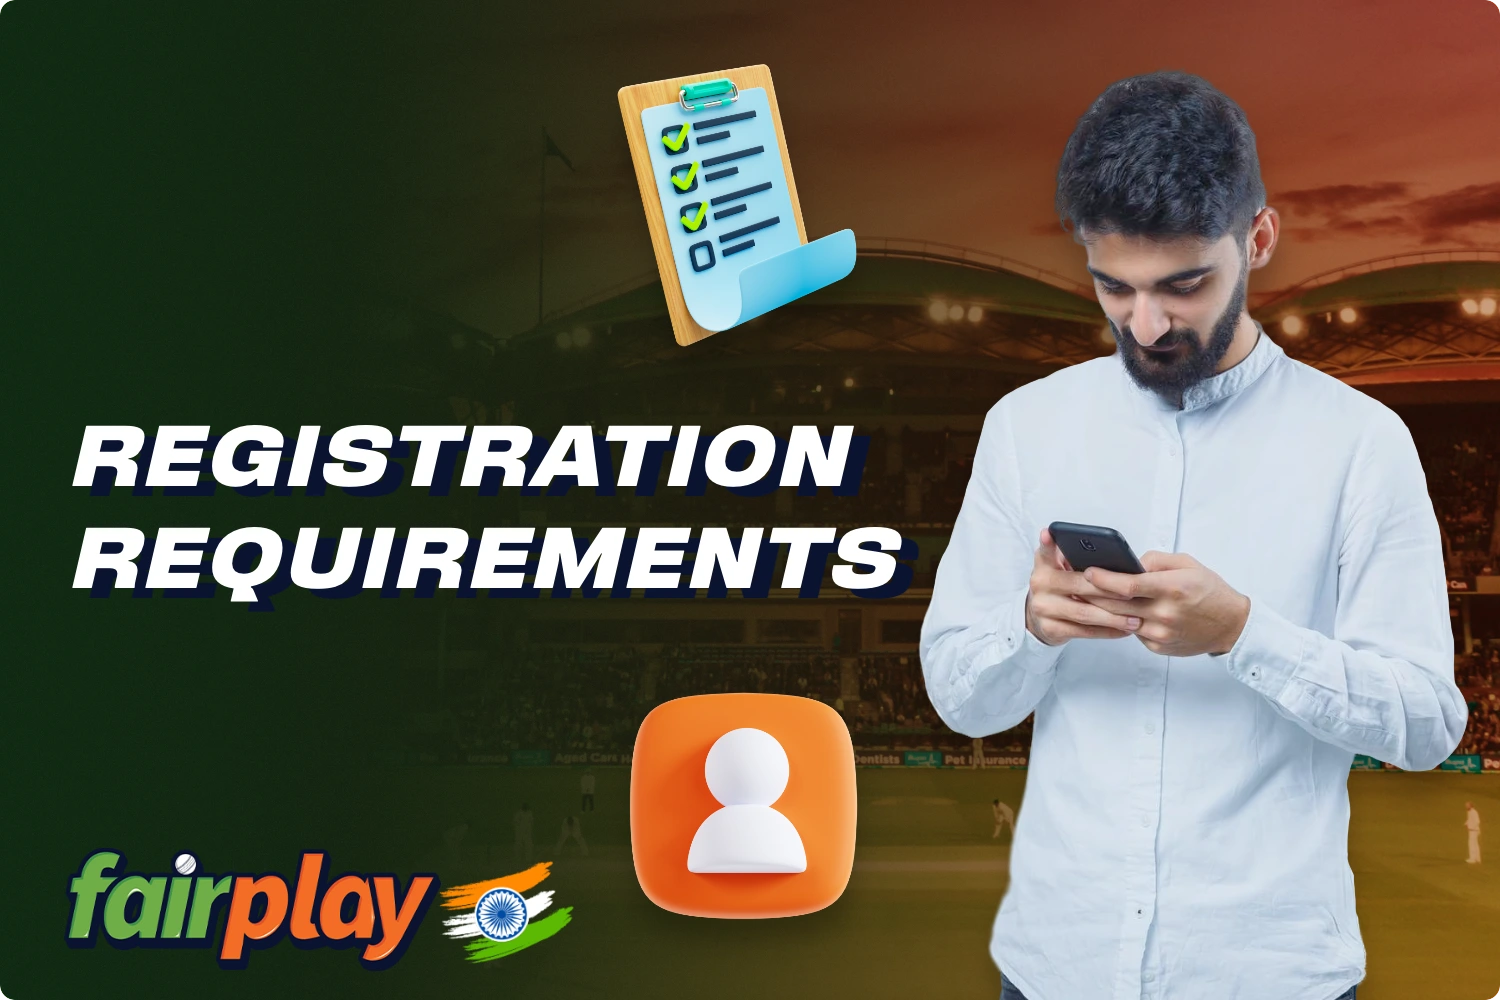 All users from India need to comply with Fairplay registration requirements